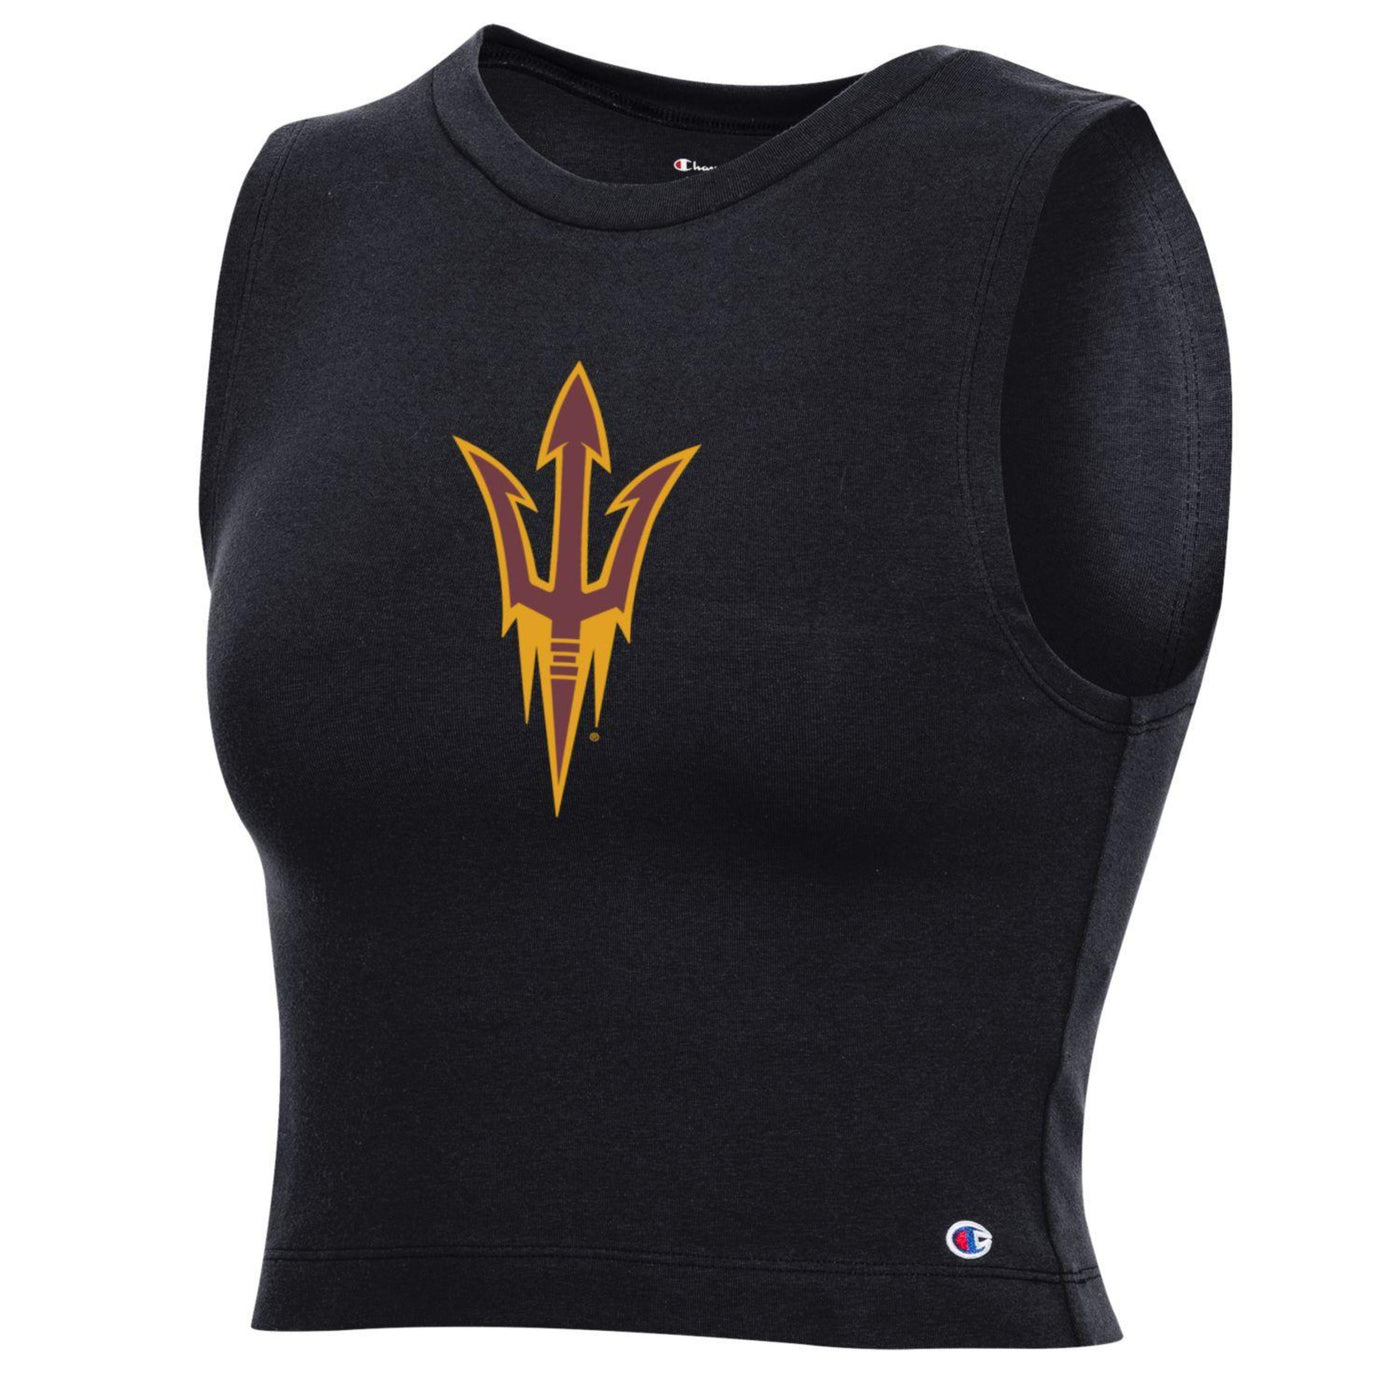 ASU black cropped tank top featuring an ASU pitchfork on the chest. Pitchfork is maroon with gold outline.  